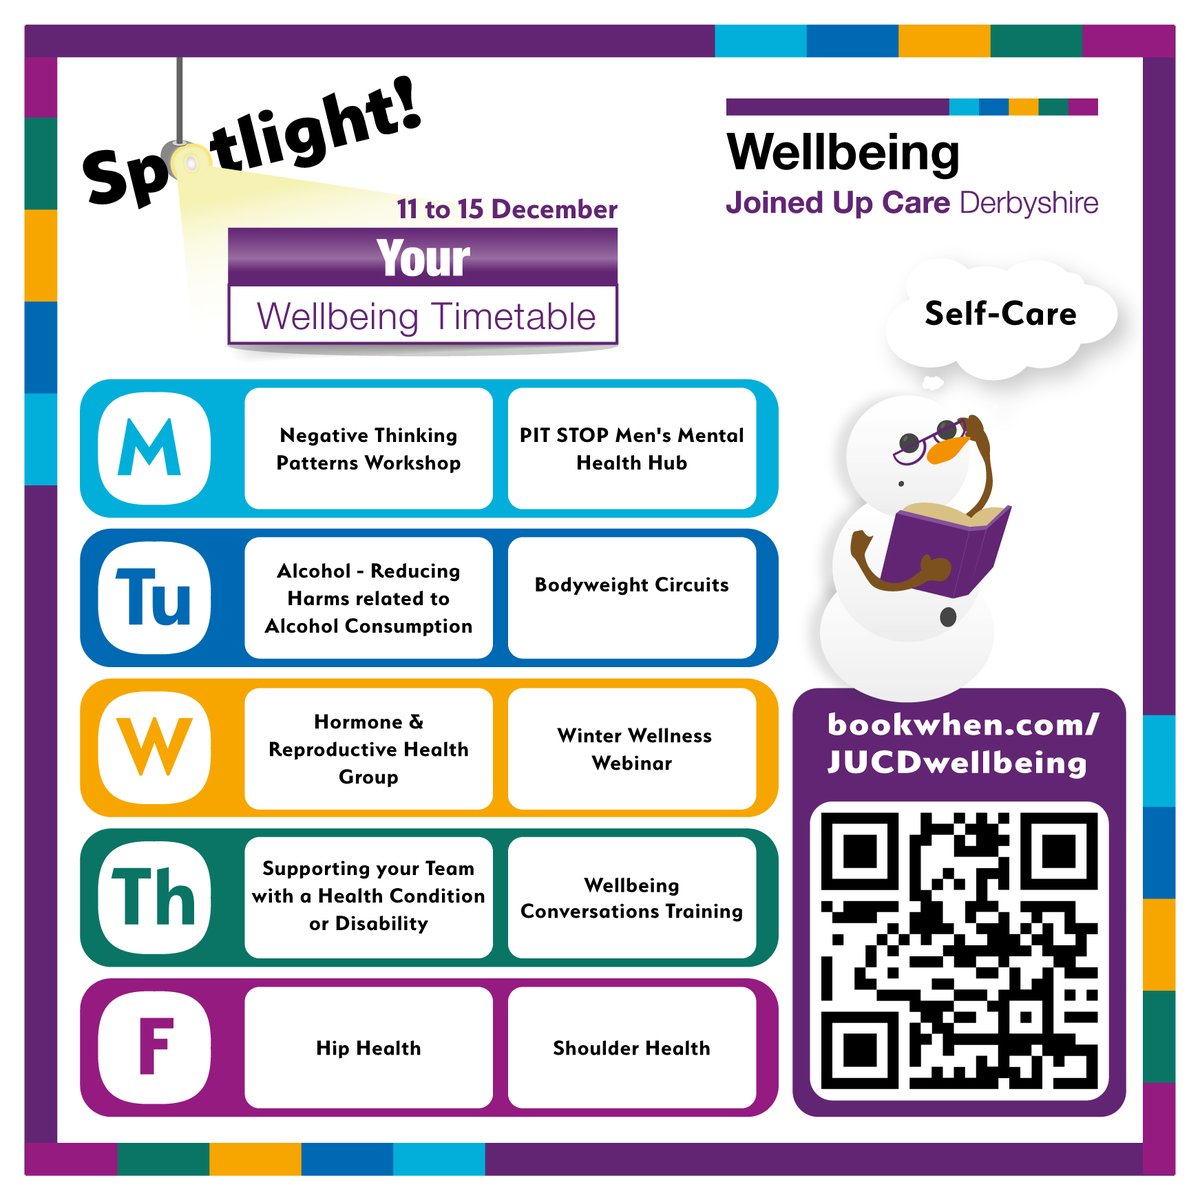 Keep healthy & well during the festive season with an incredible range of FREE winter wellbeing support sessions for colleagues ⛄️ Tune into our Winter Wellness Webinar, learn how to have supportive wellbeing conversations & overcome negative thinking. ➡️bookwhen.com/jucdwellbeing